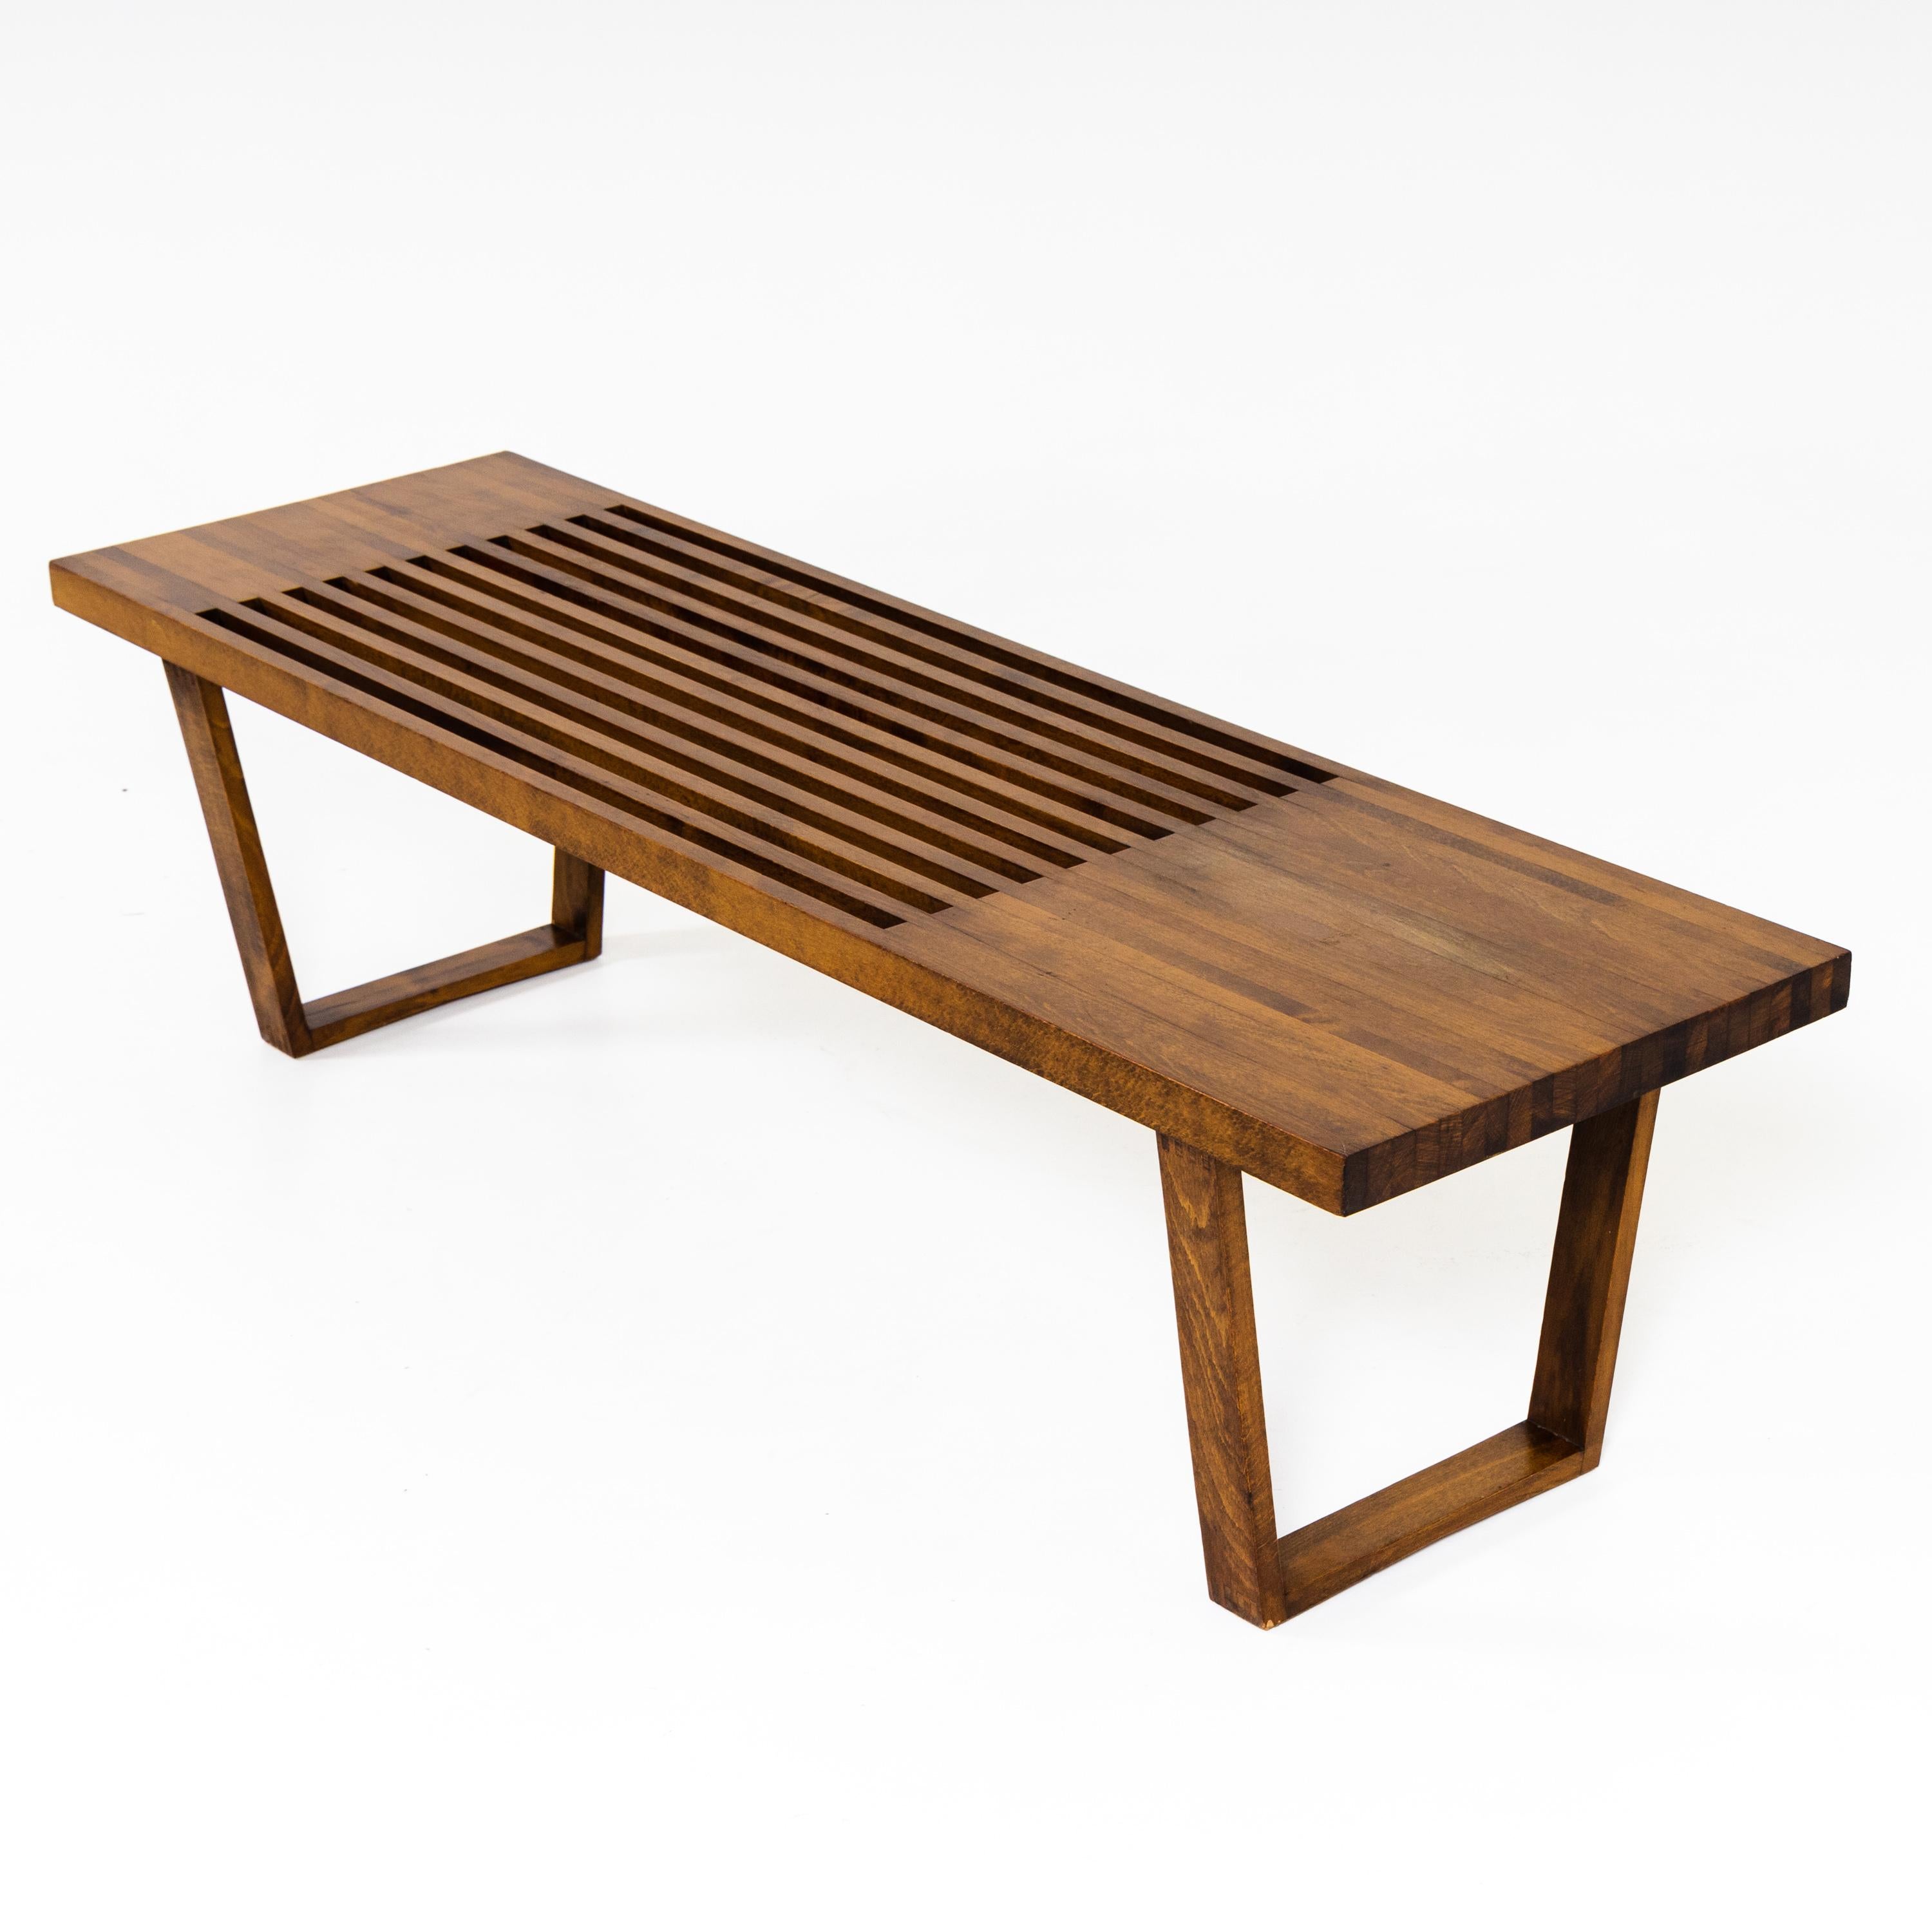 Mid-Century Modern Slat Bench in the Style of George Nelson, Mid-20th Century